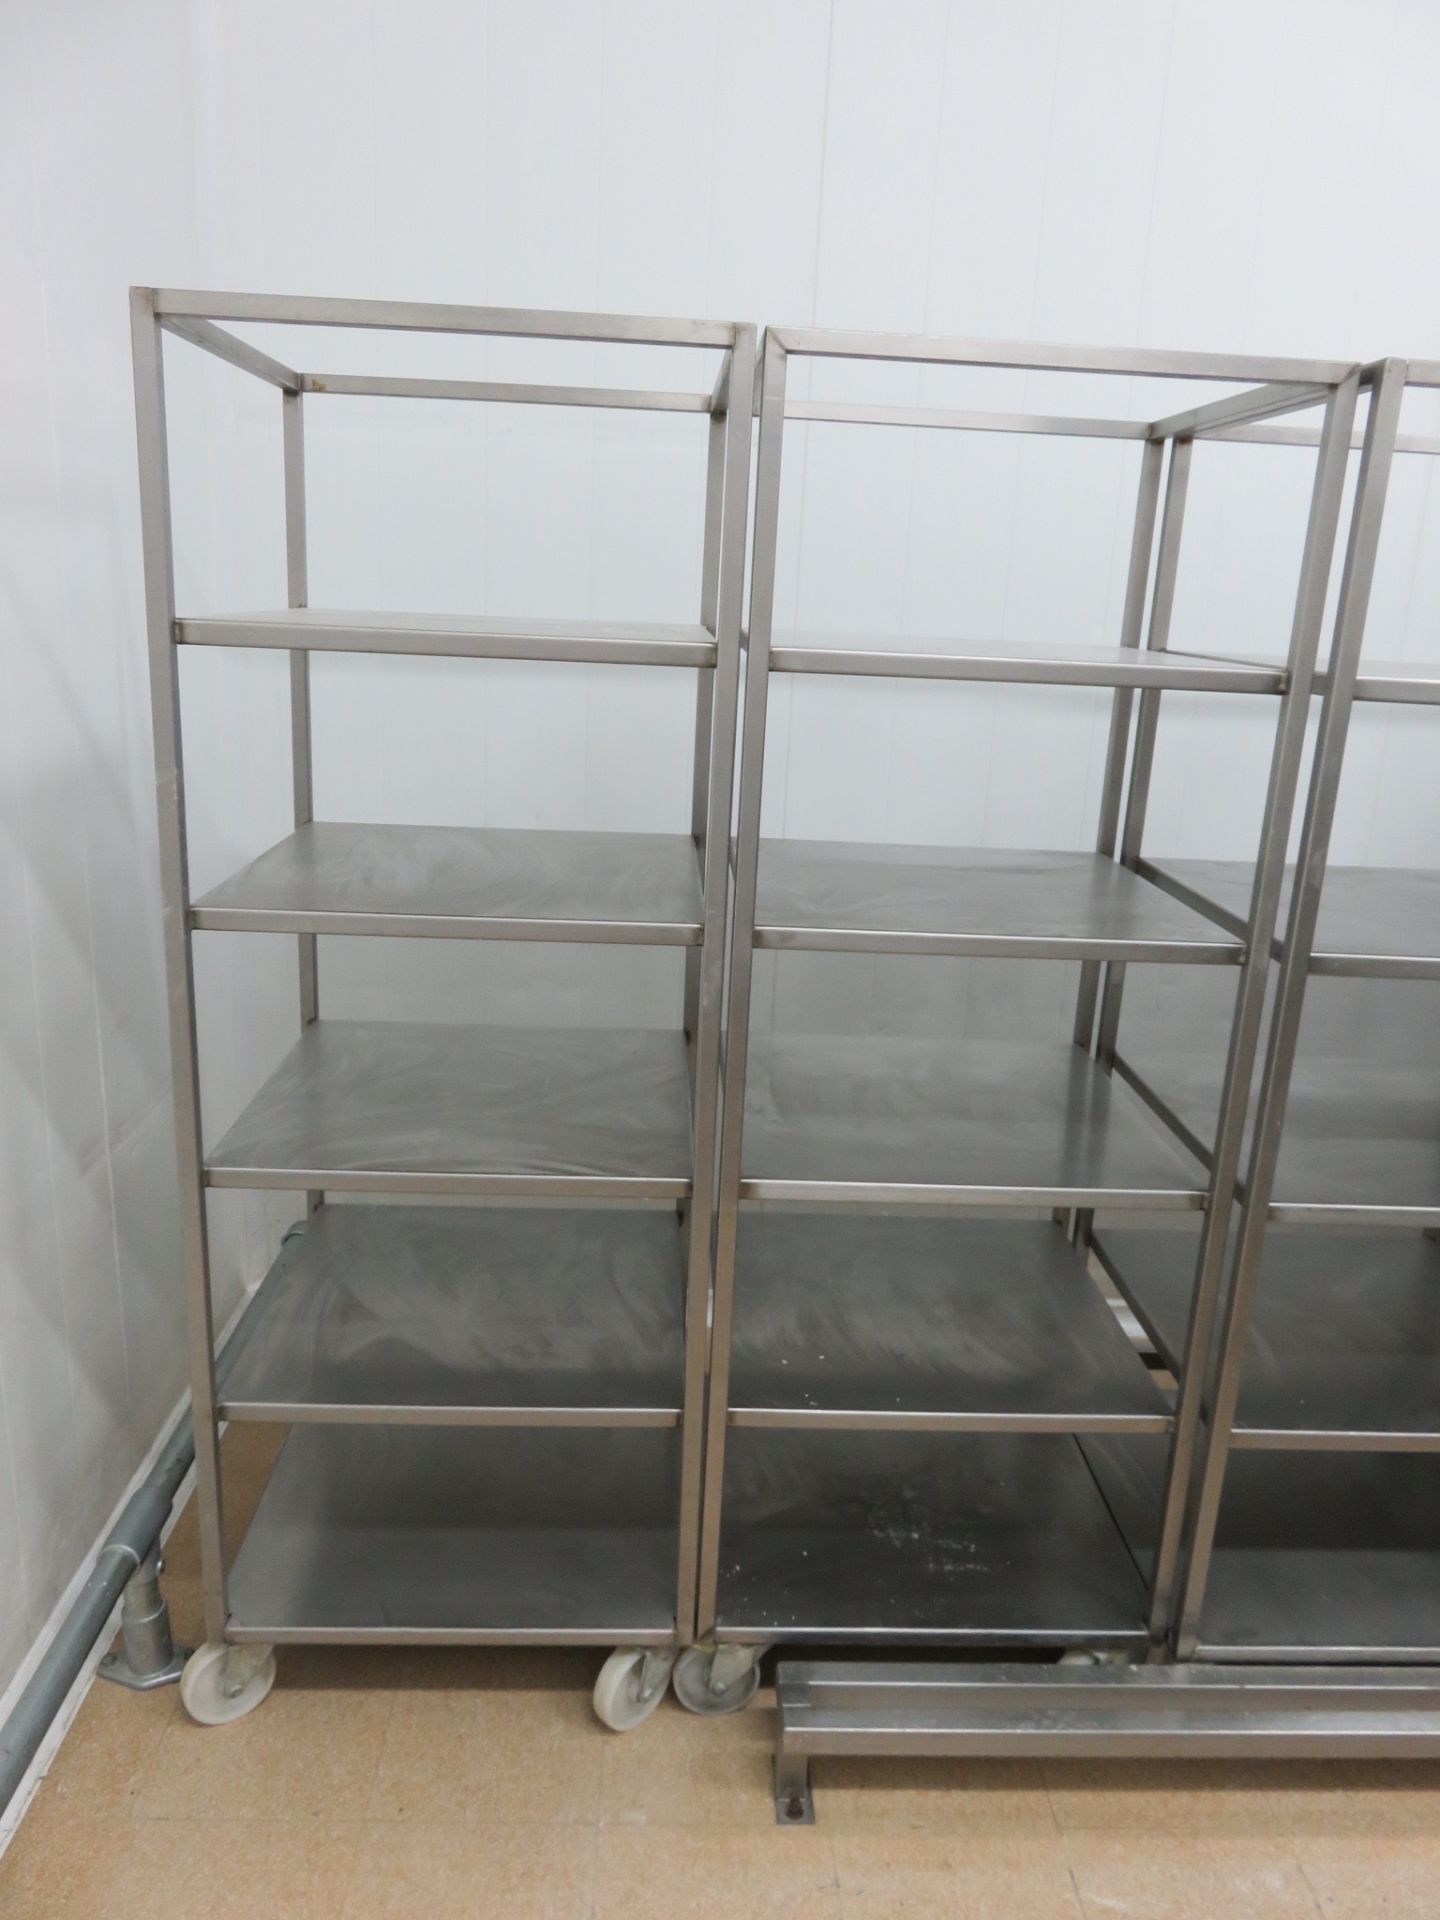 2 x S/s mobile trollies with 5 shelves. Approx. 600mm x 600mm x 1800mm high. Lift Out £50